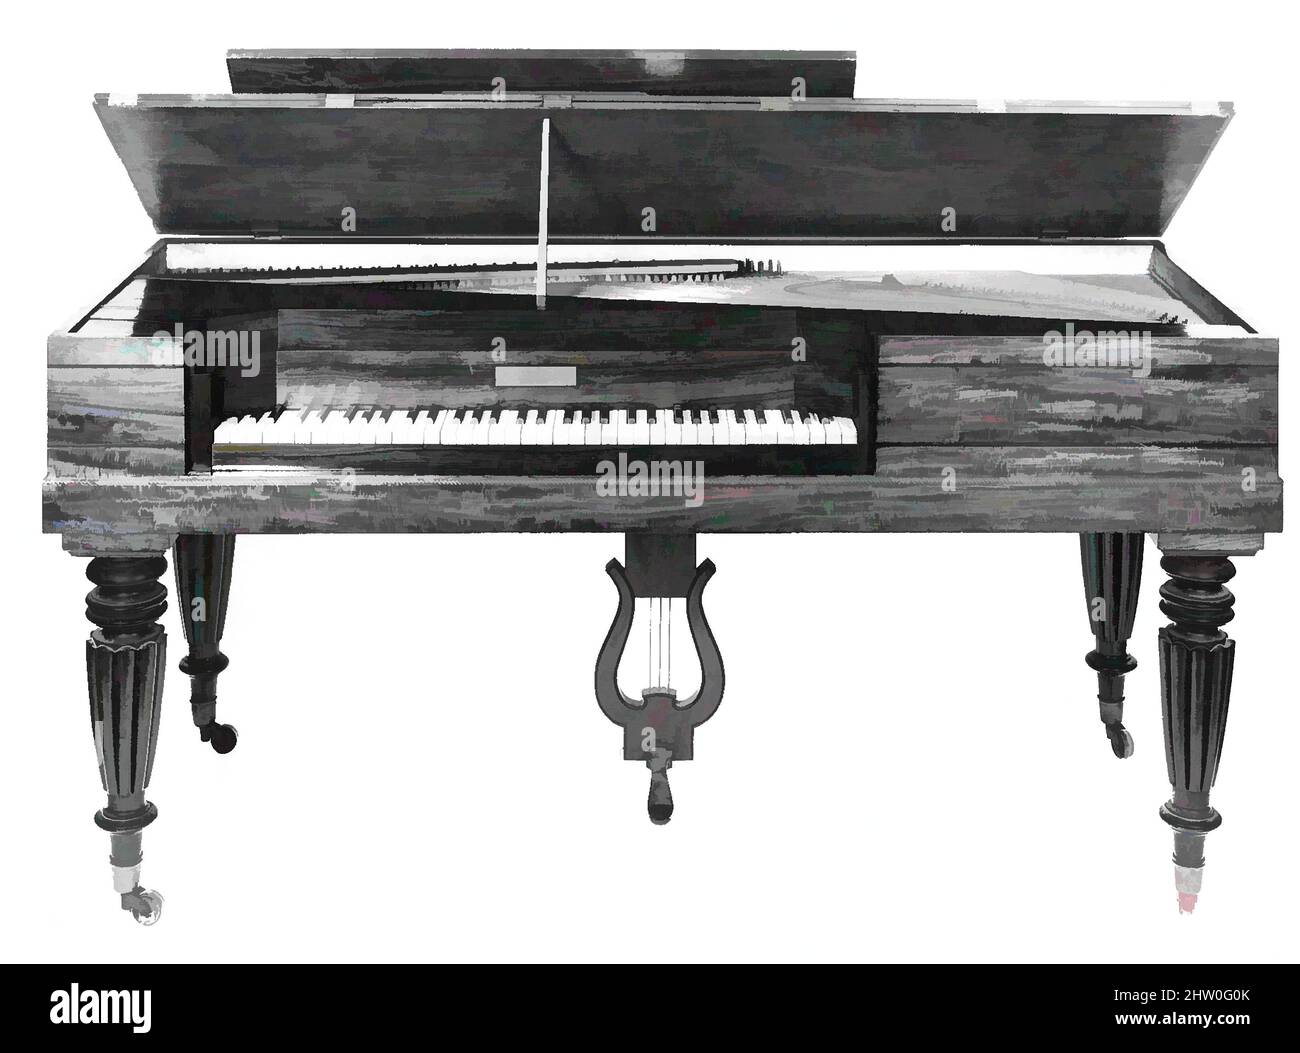 Art inspired by Square Piano, 1829, Boston, Massachusetts, United States, American, Wood, various materials, Case L: 70.9 cm (27-15/16 in.), Chordophone-Zither-struck-piano, Jonas Chickering (American, Mason Village, New Hampshire 1798–1853 Boston), Chickering was the first important, Classic works modernized by Artotop with a splash of modernity. Shapes, color and value, eye-catching visual impact on art. Emotions through freedom of artworks in a contemporary way. A timeless message pursuing a wildly creative new direction. Artists turning to the digital medium and creating the Artotop NFT Stock Photo